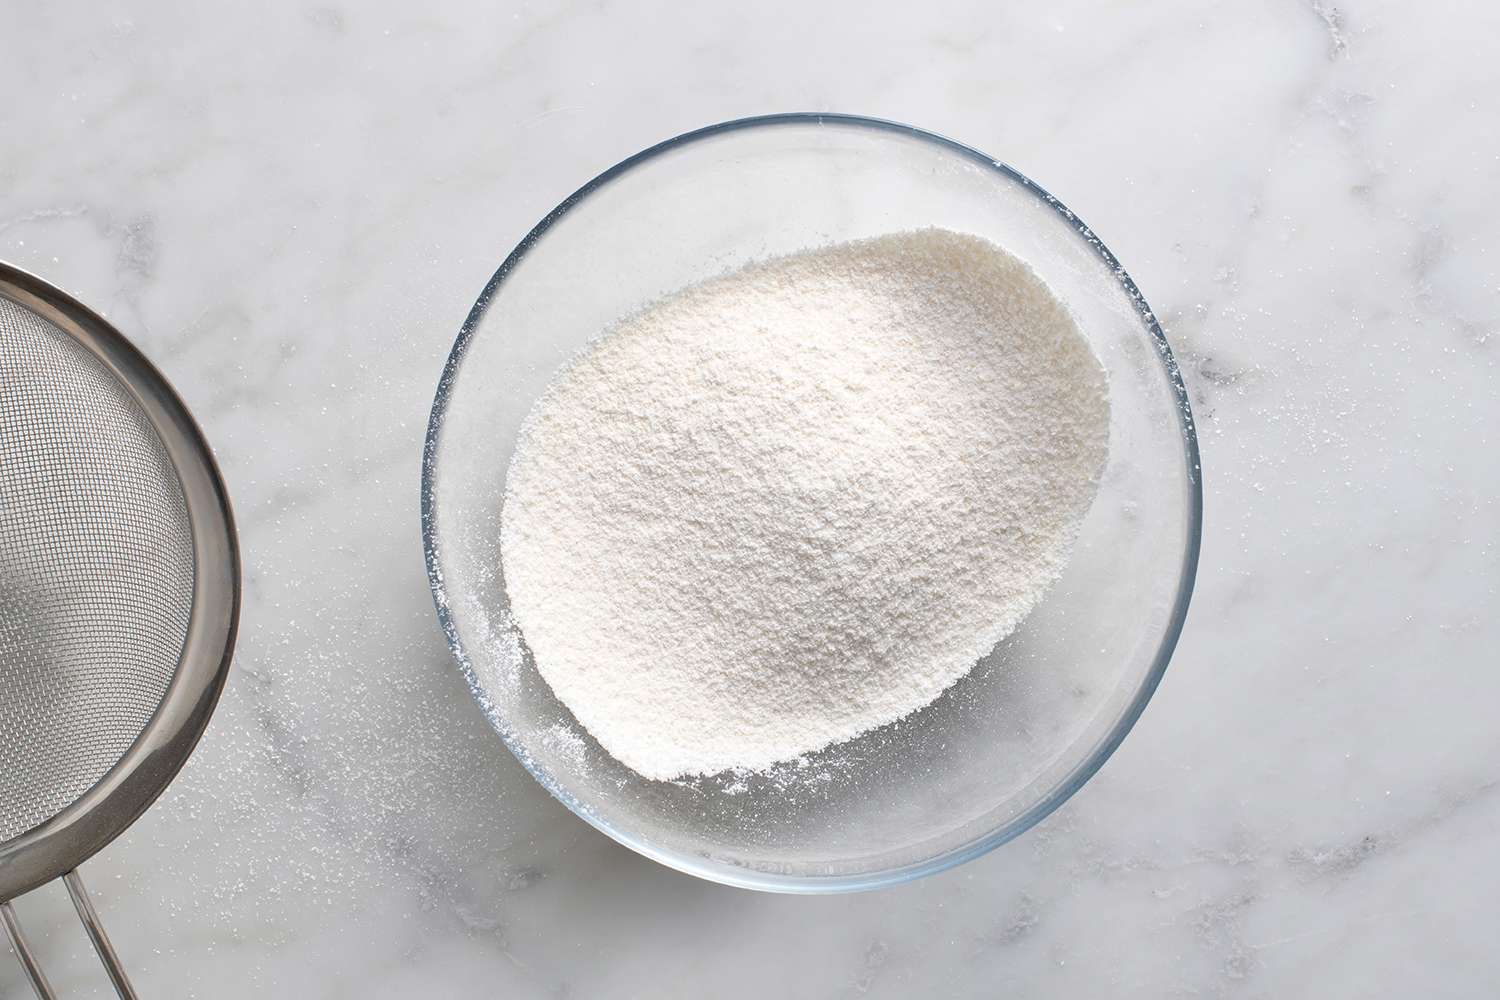 Sweetener, coconut flour, arrowroot flour, and salt sifted into a bowl